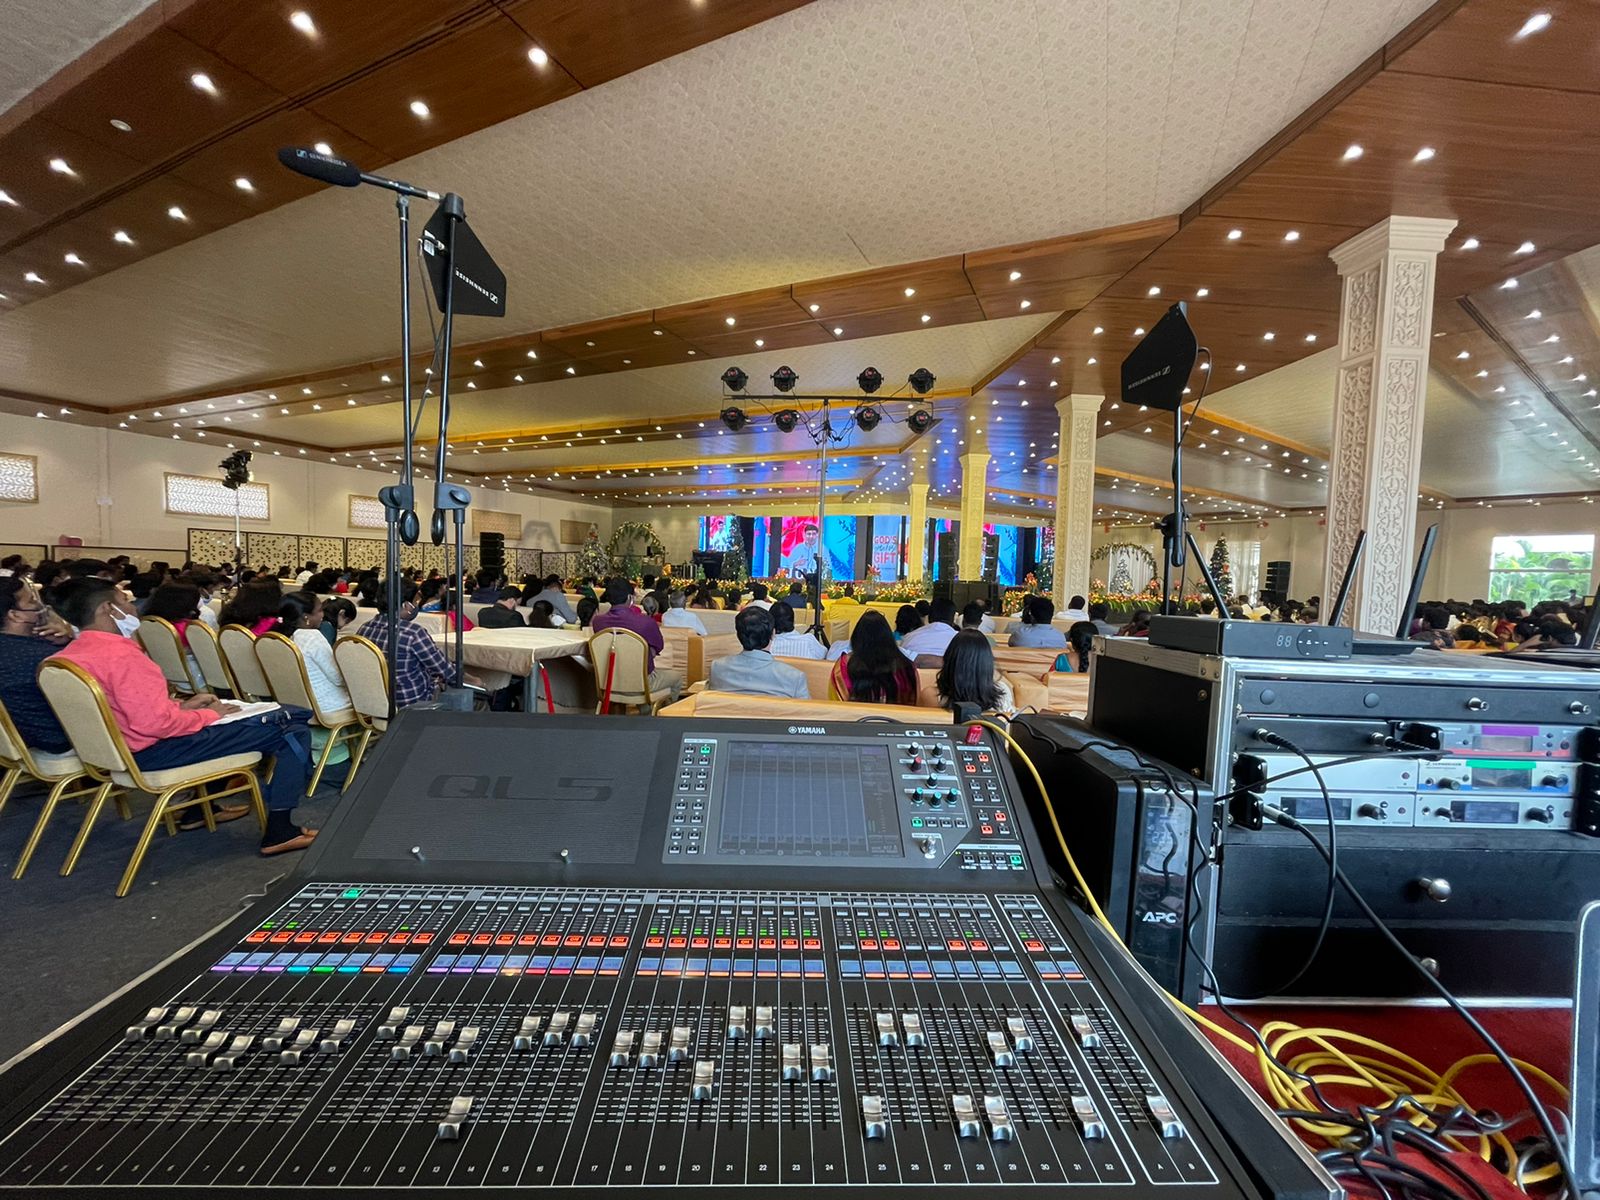 ZSOUND Audio Equipment Delivers Exceptional Sound at Indian Conference